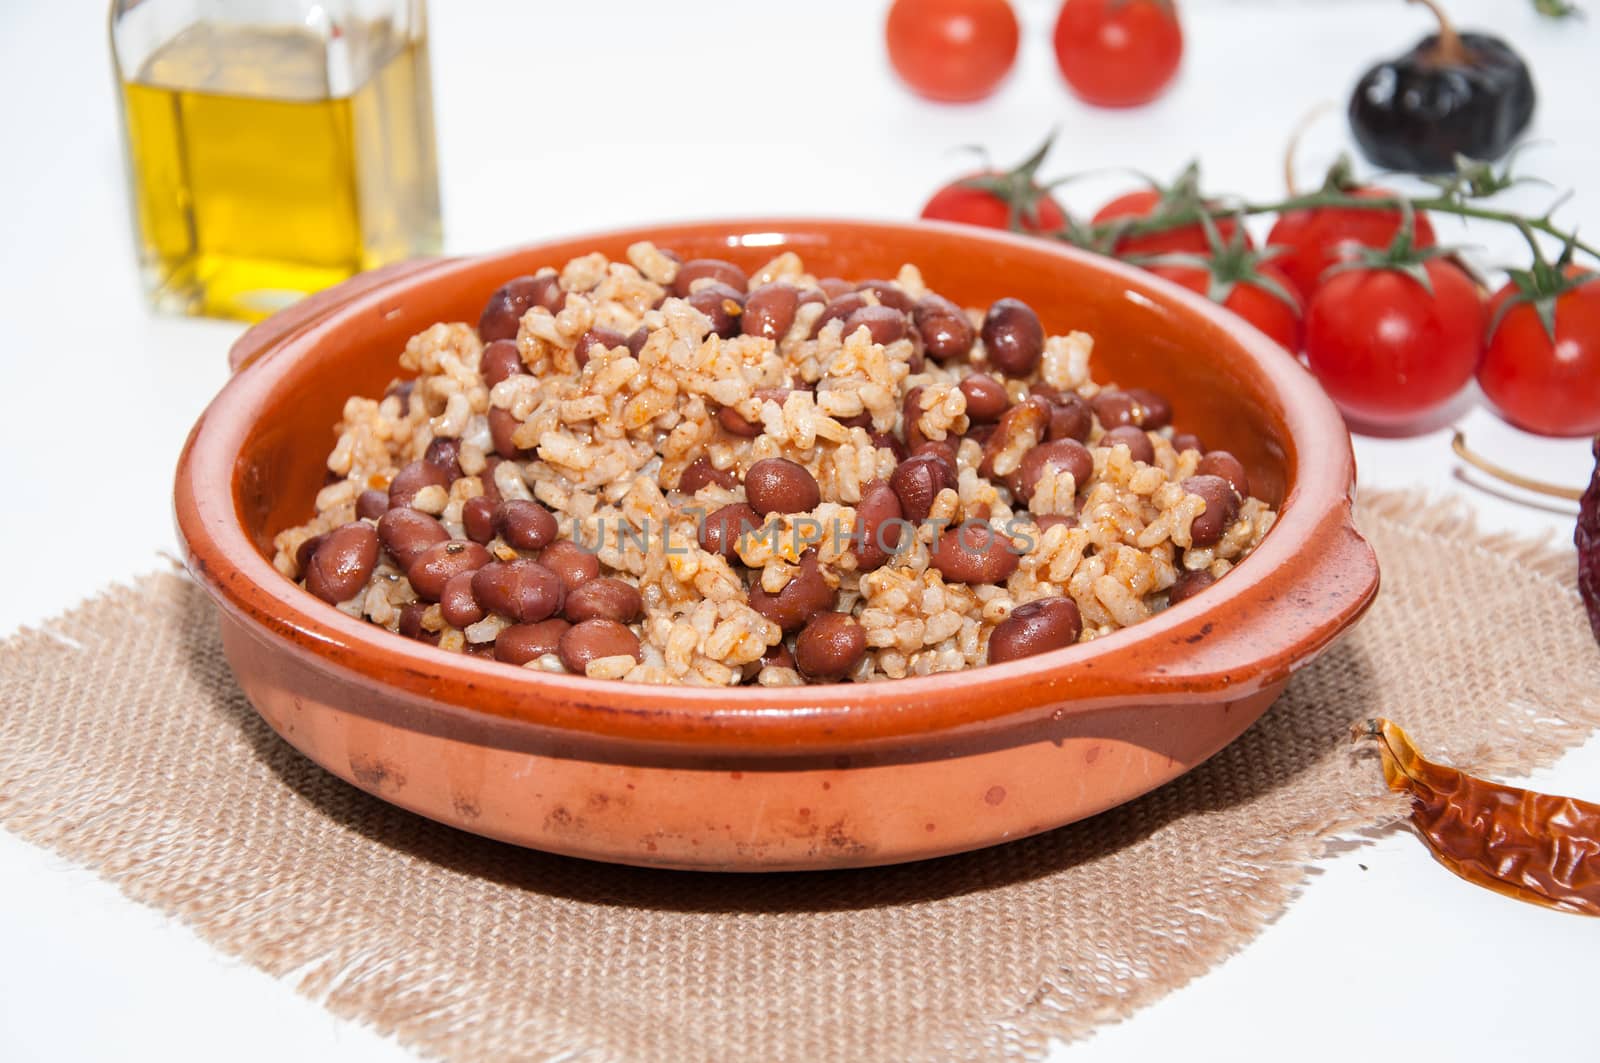 Casserole of beans and rice by Mariamarmar